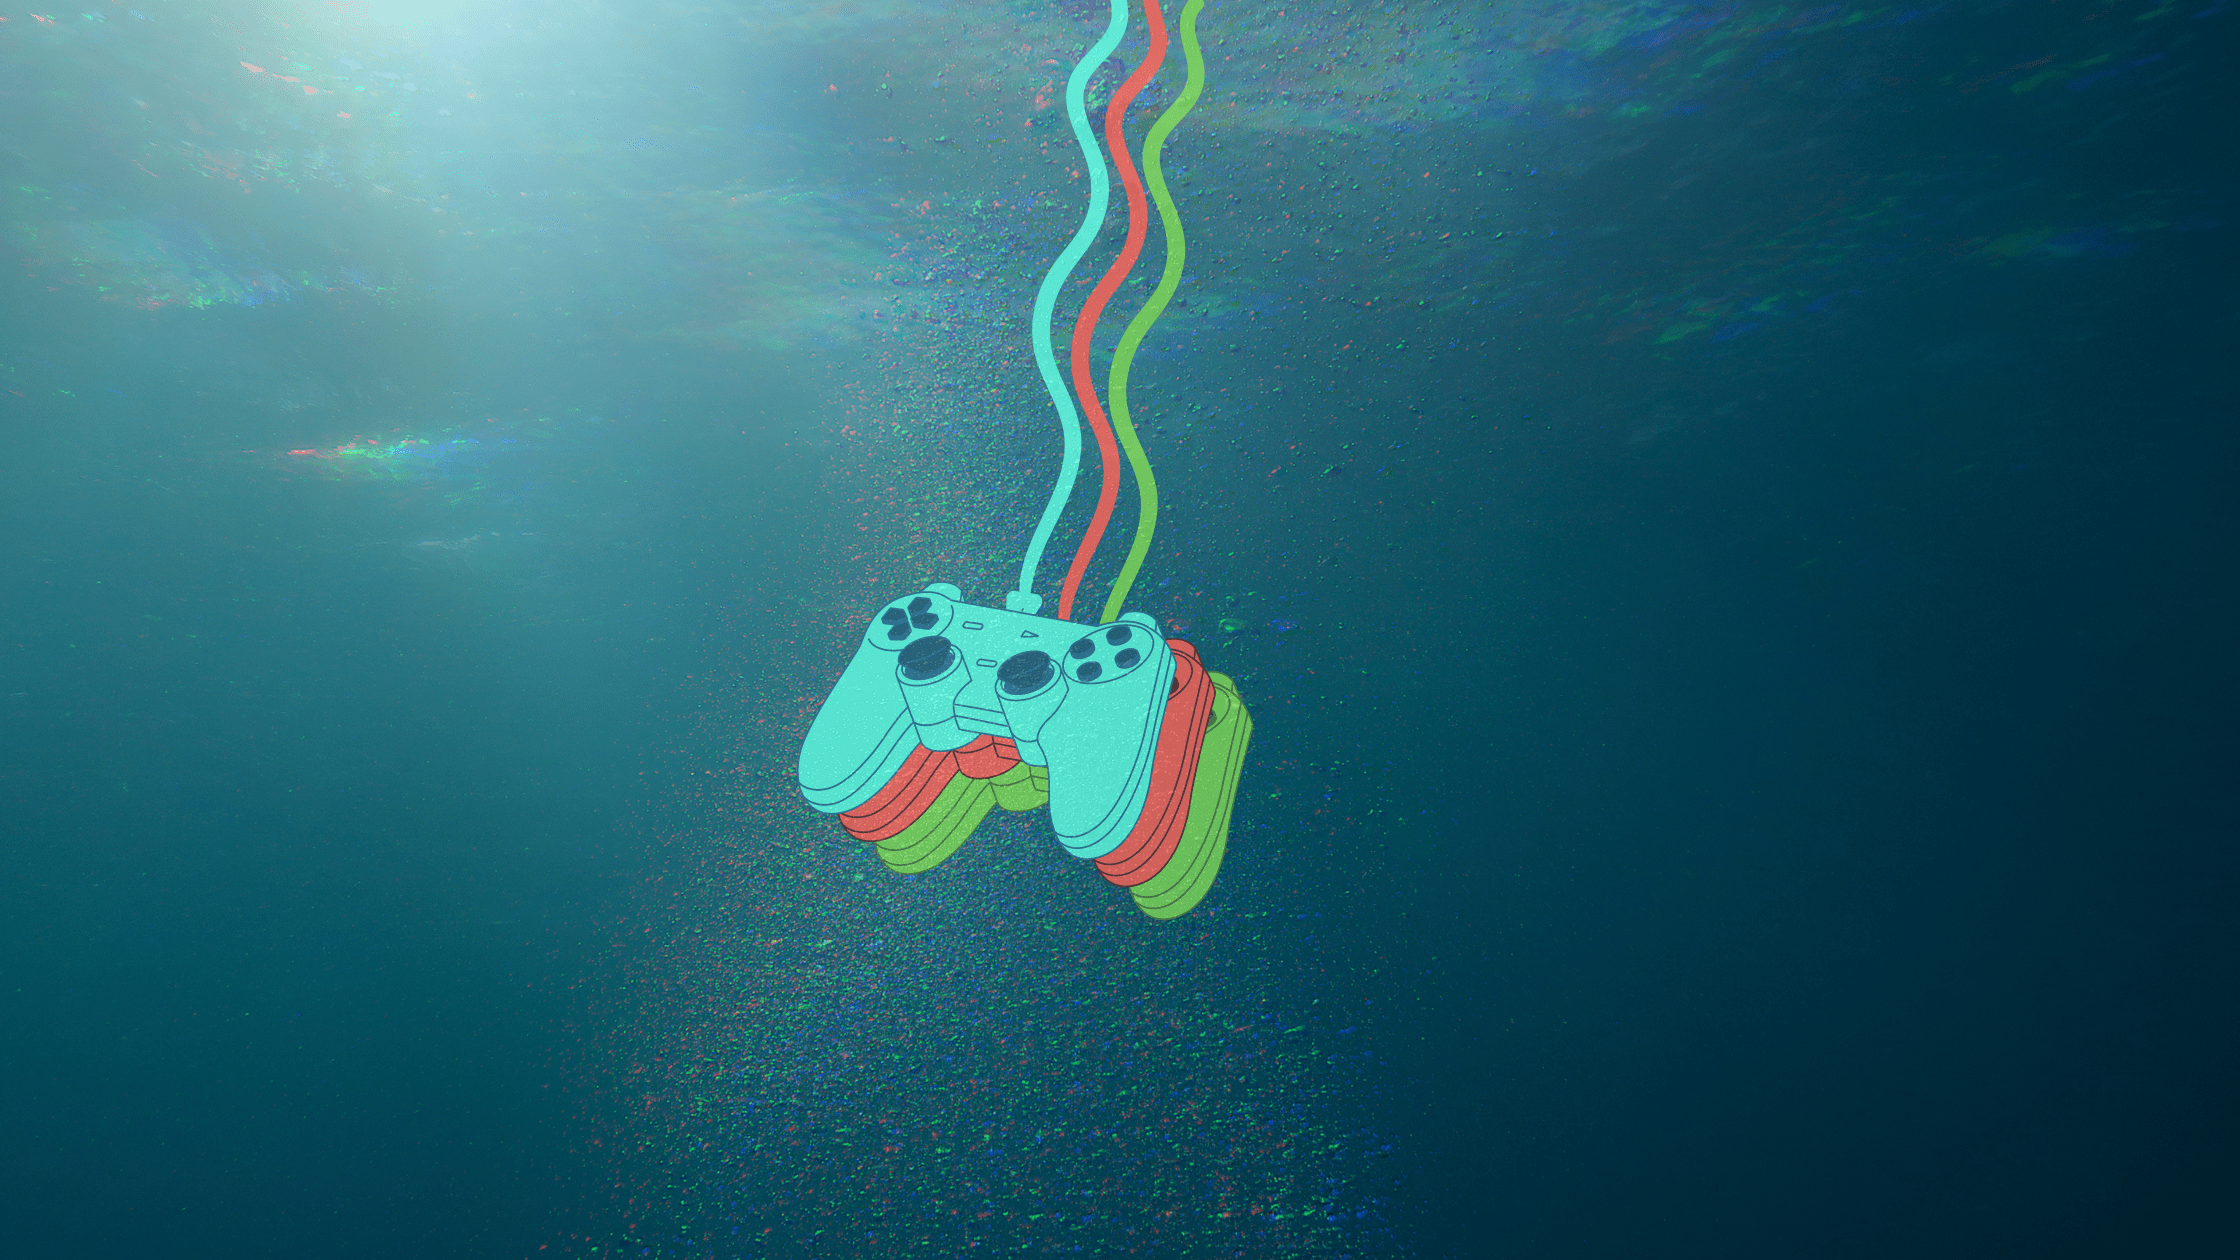 A video game controller immersed in water.